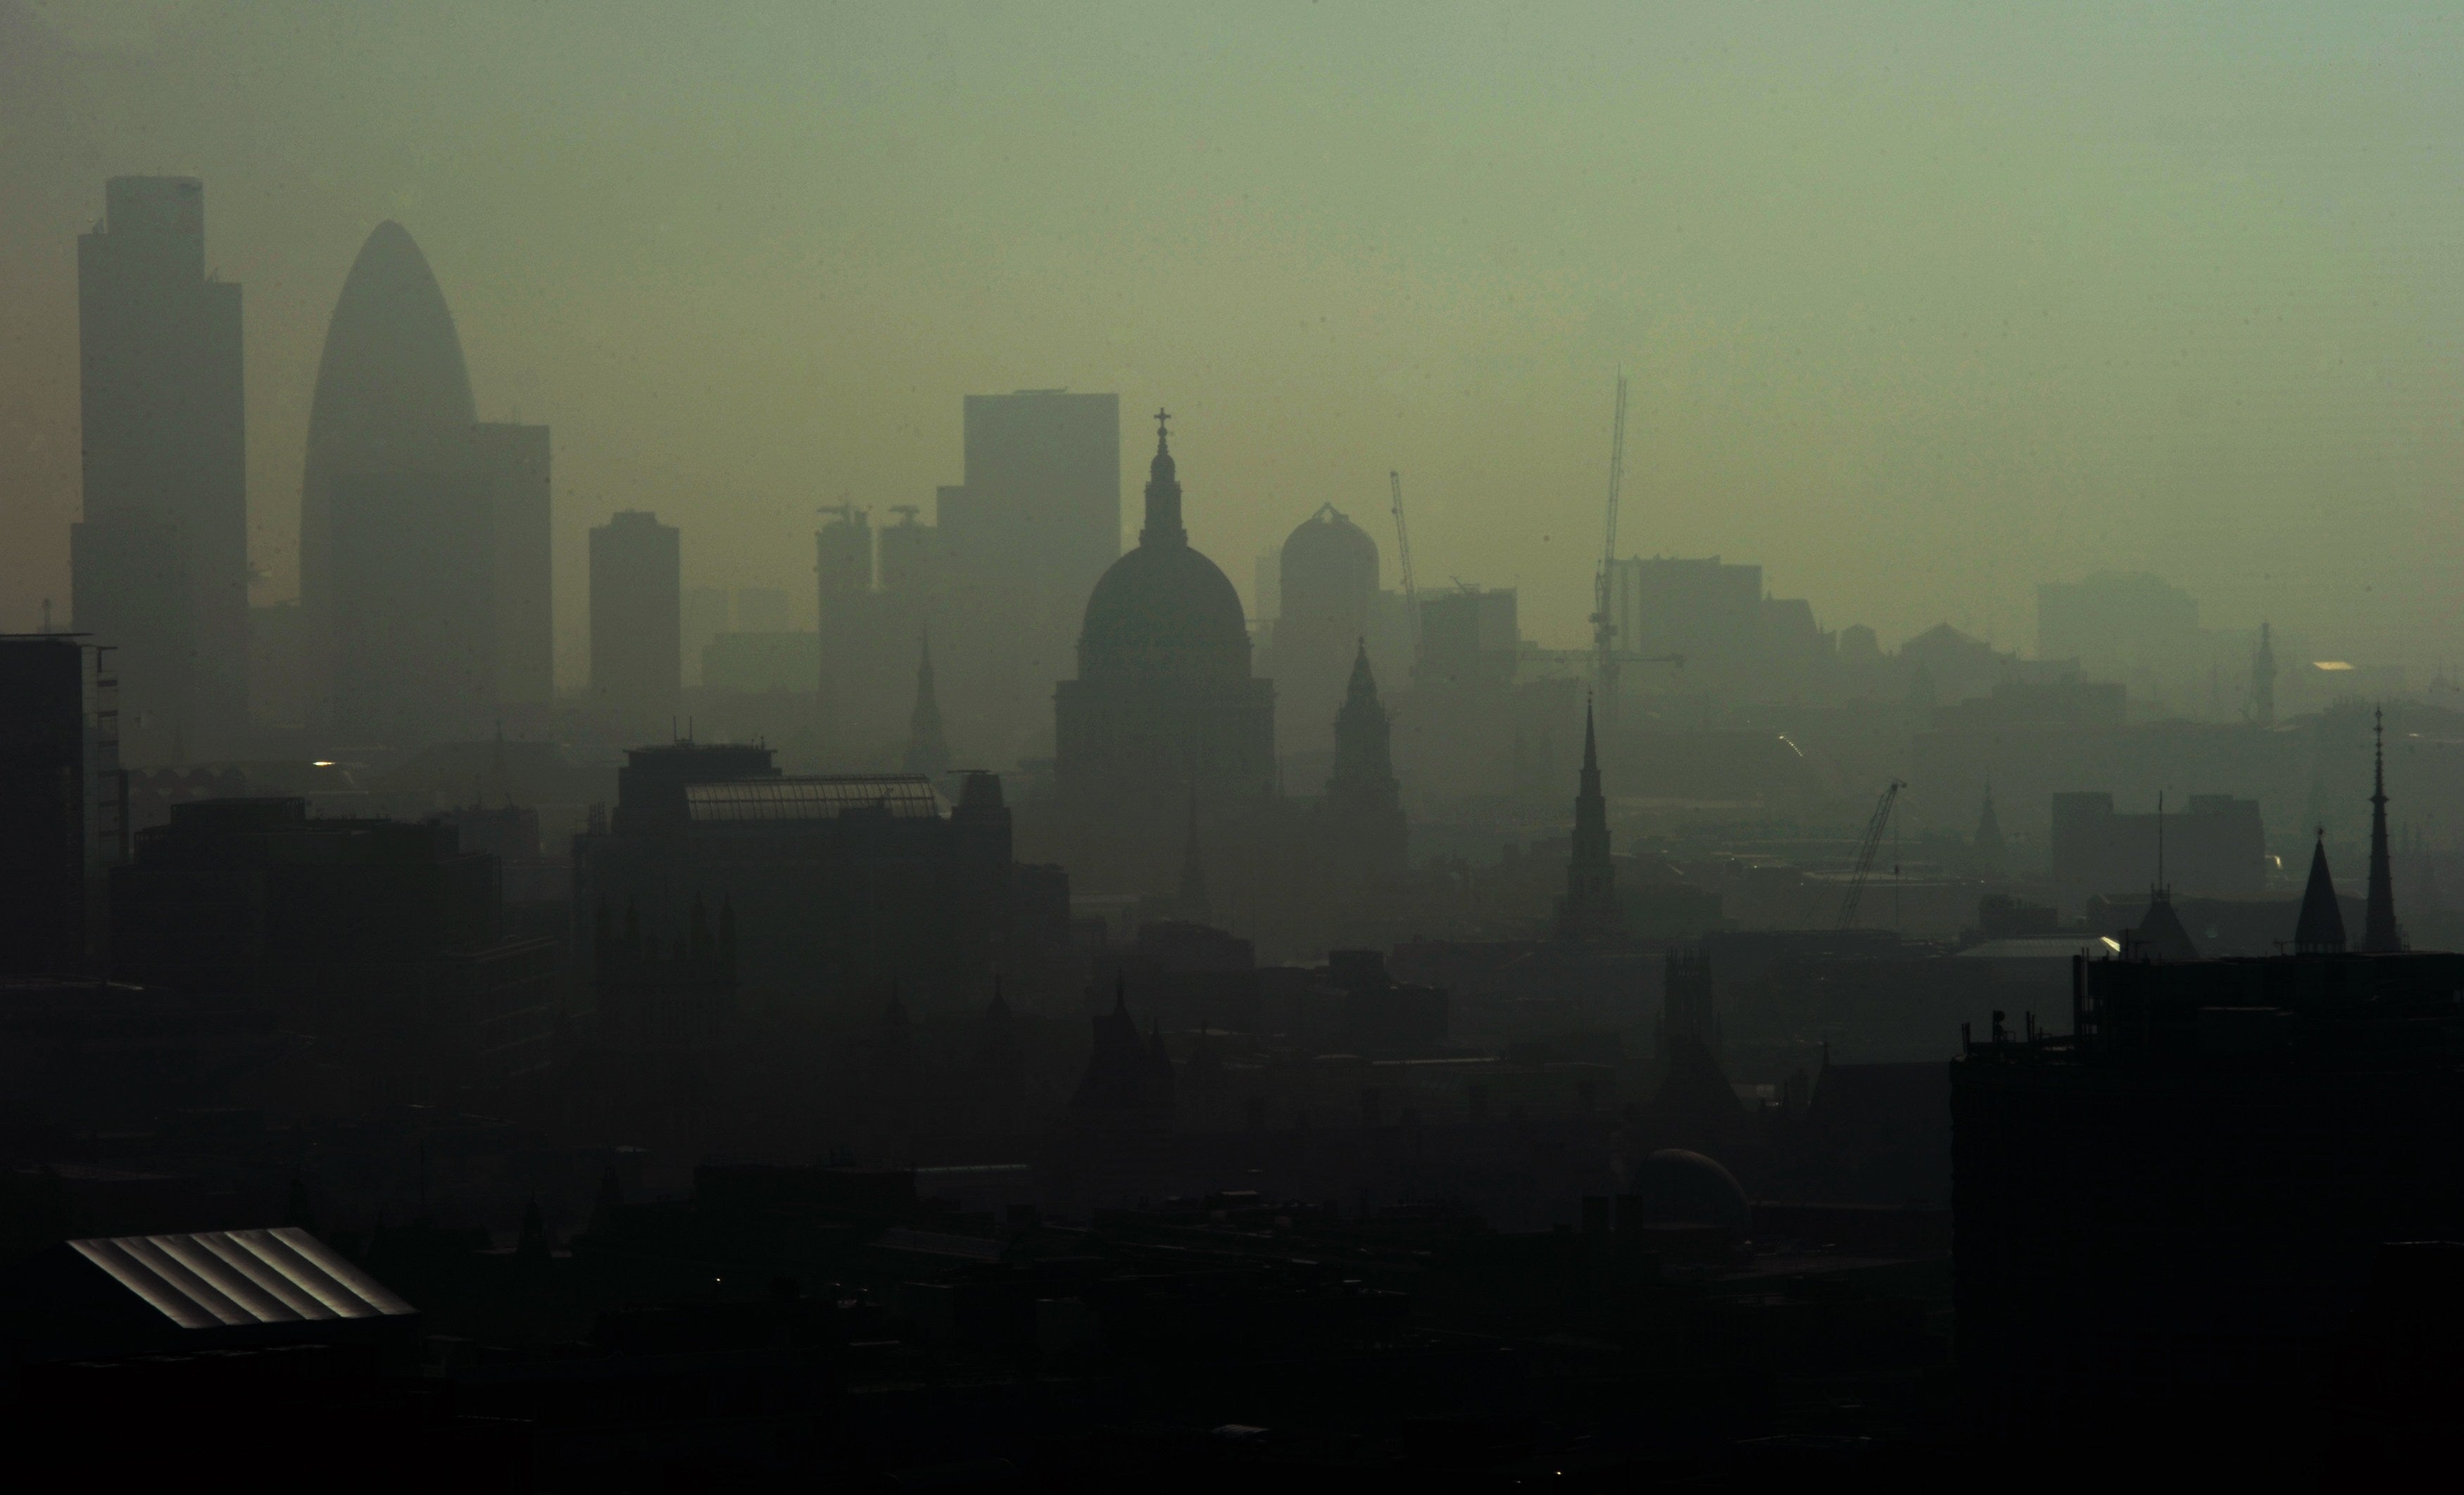 St. Paul’s Cathedral is seen among the skyline through smog in 2011